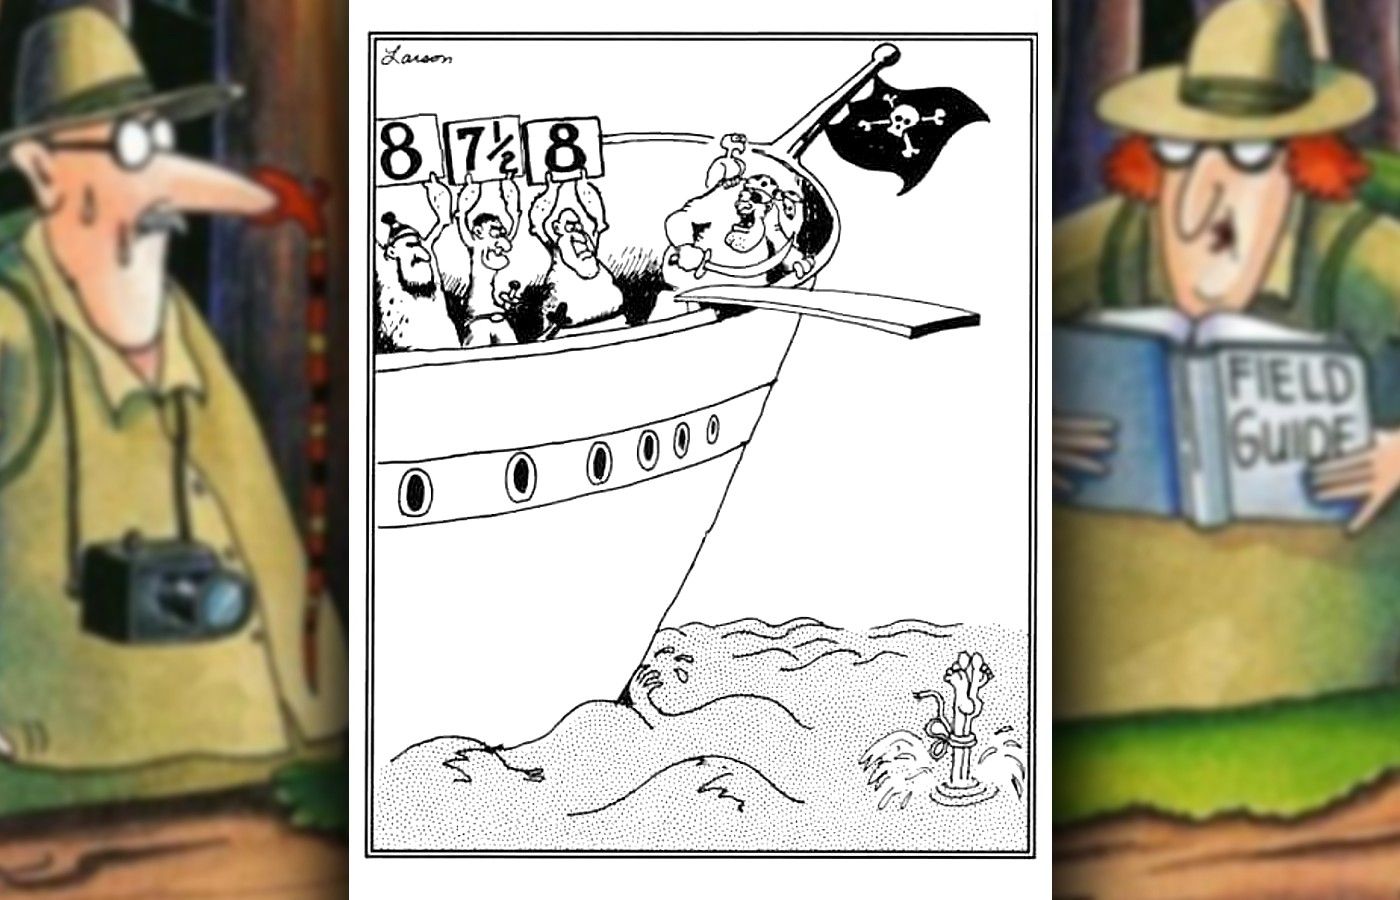 far side comic pirates give someone scores for jumping off the plank